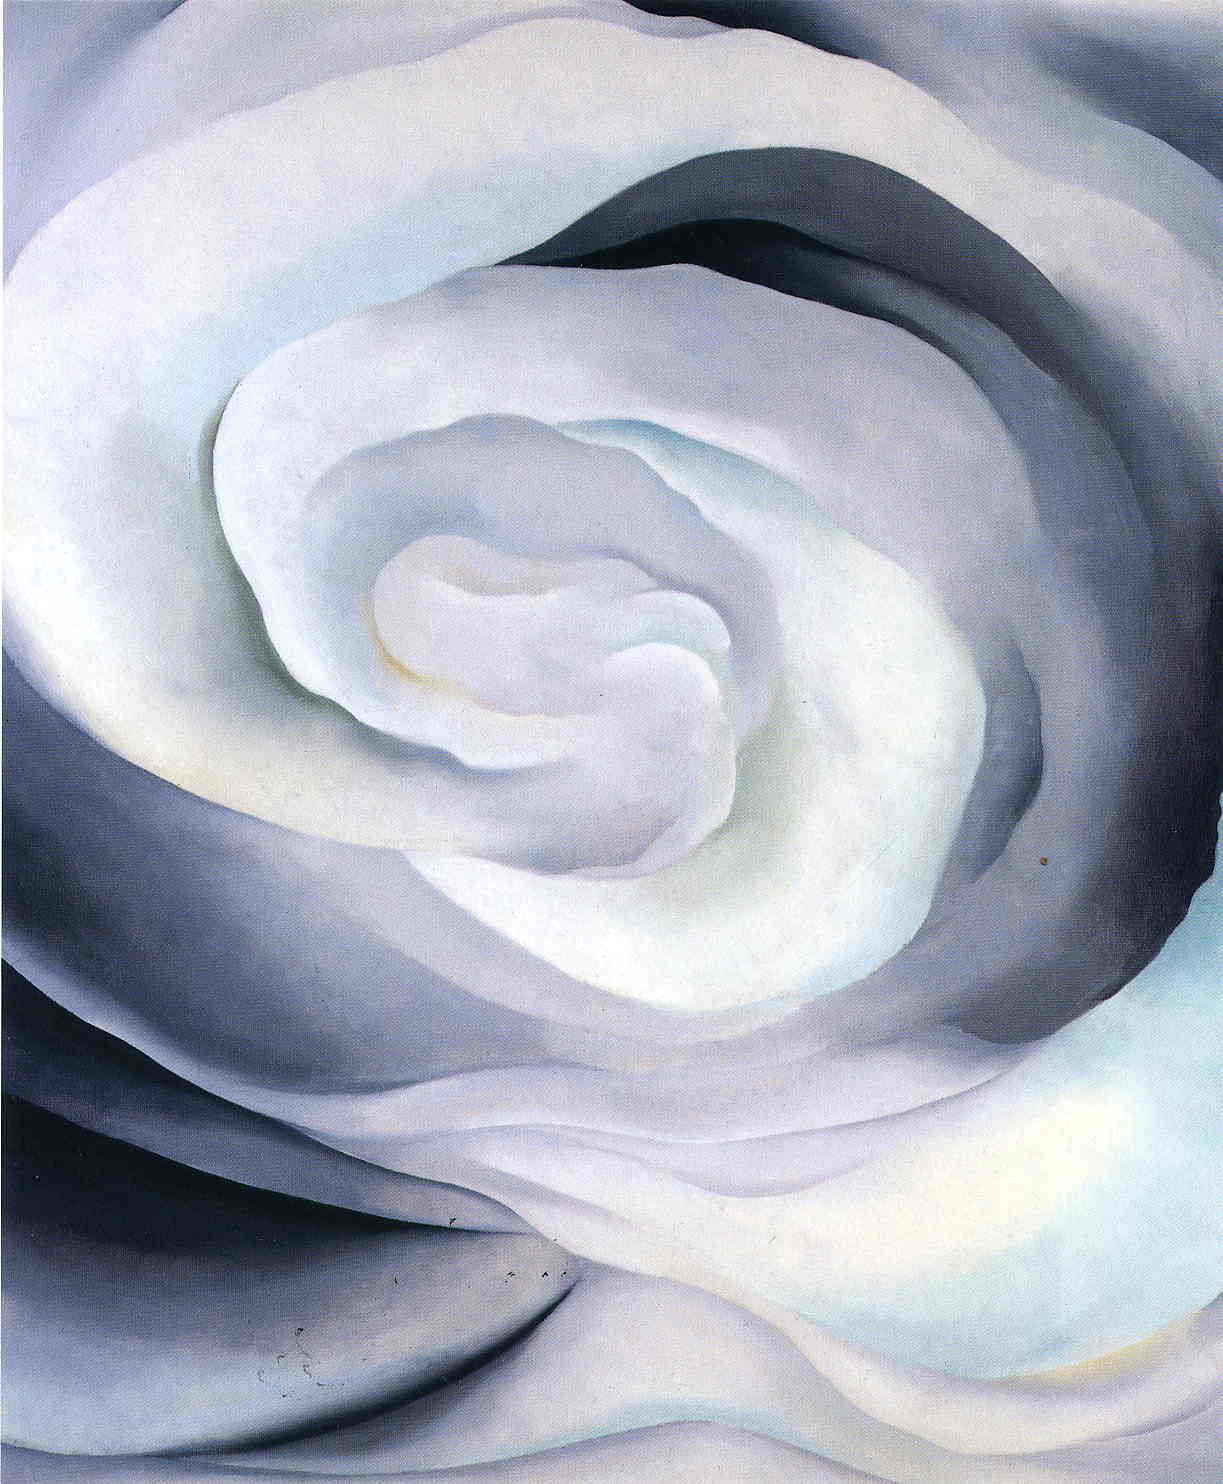 Abstraction White Rose, 1927 - Georgia O'Keeffe - WikiArt.org